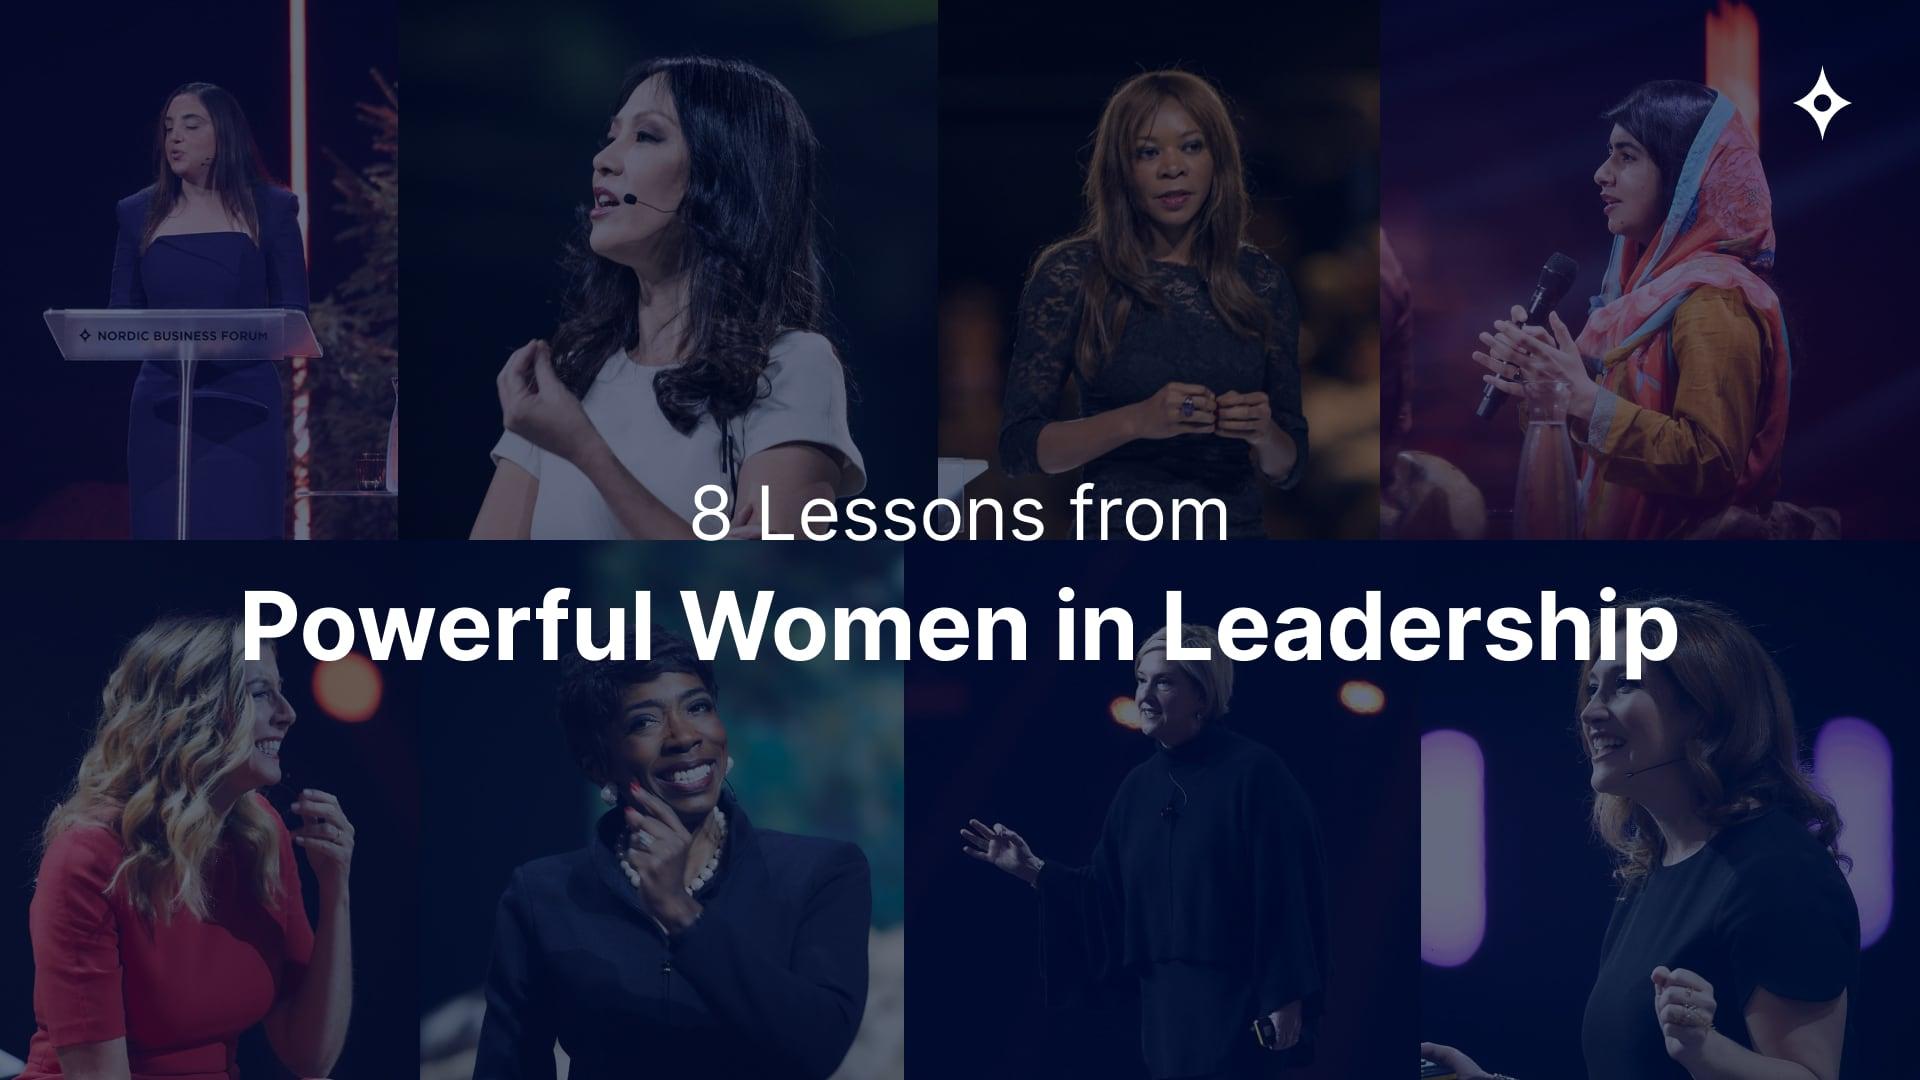 7 Powerful Stories Of Inspiring Women Leaders, Women's Day Special